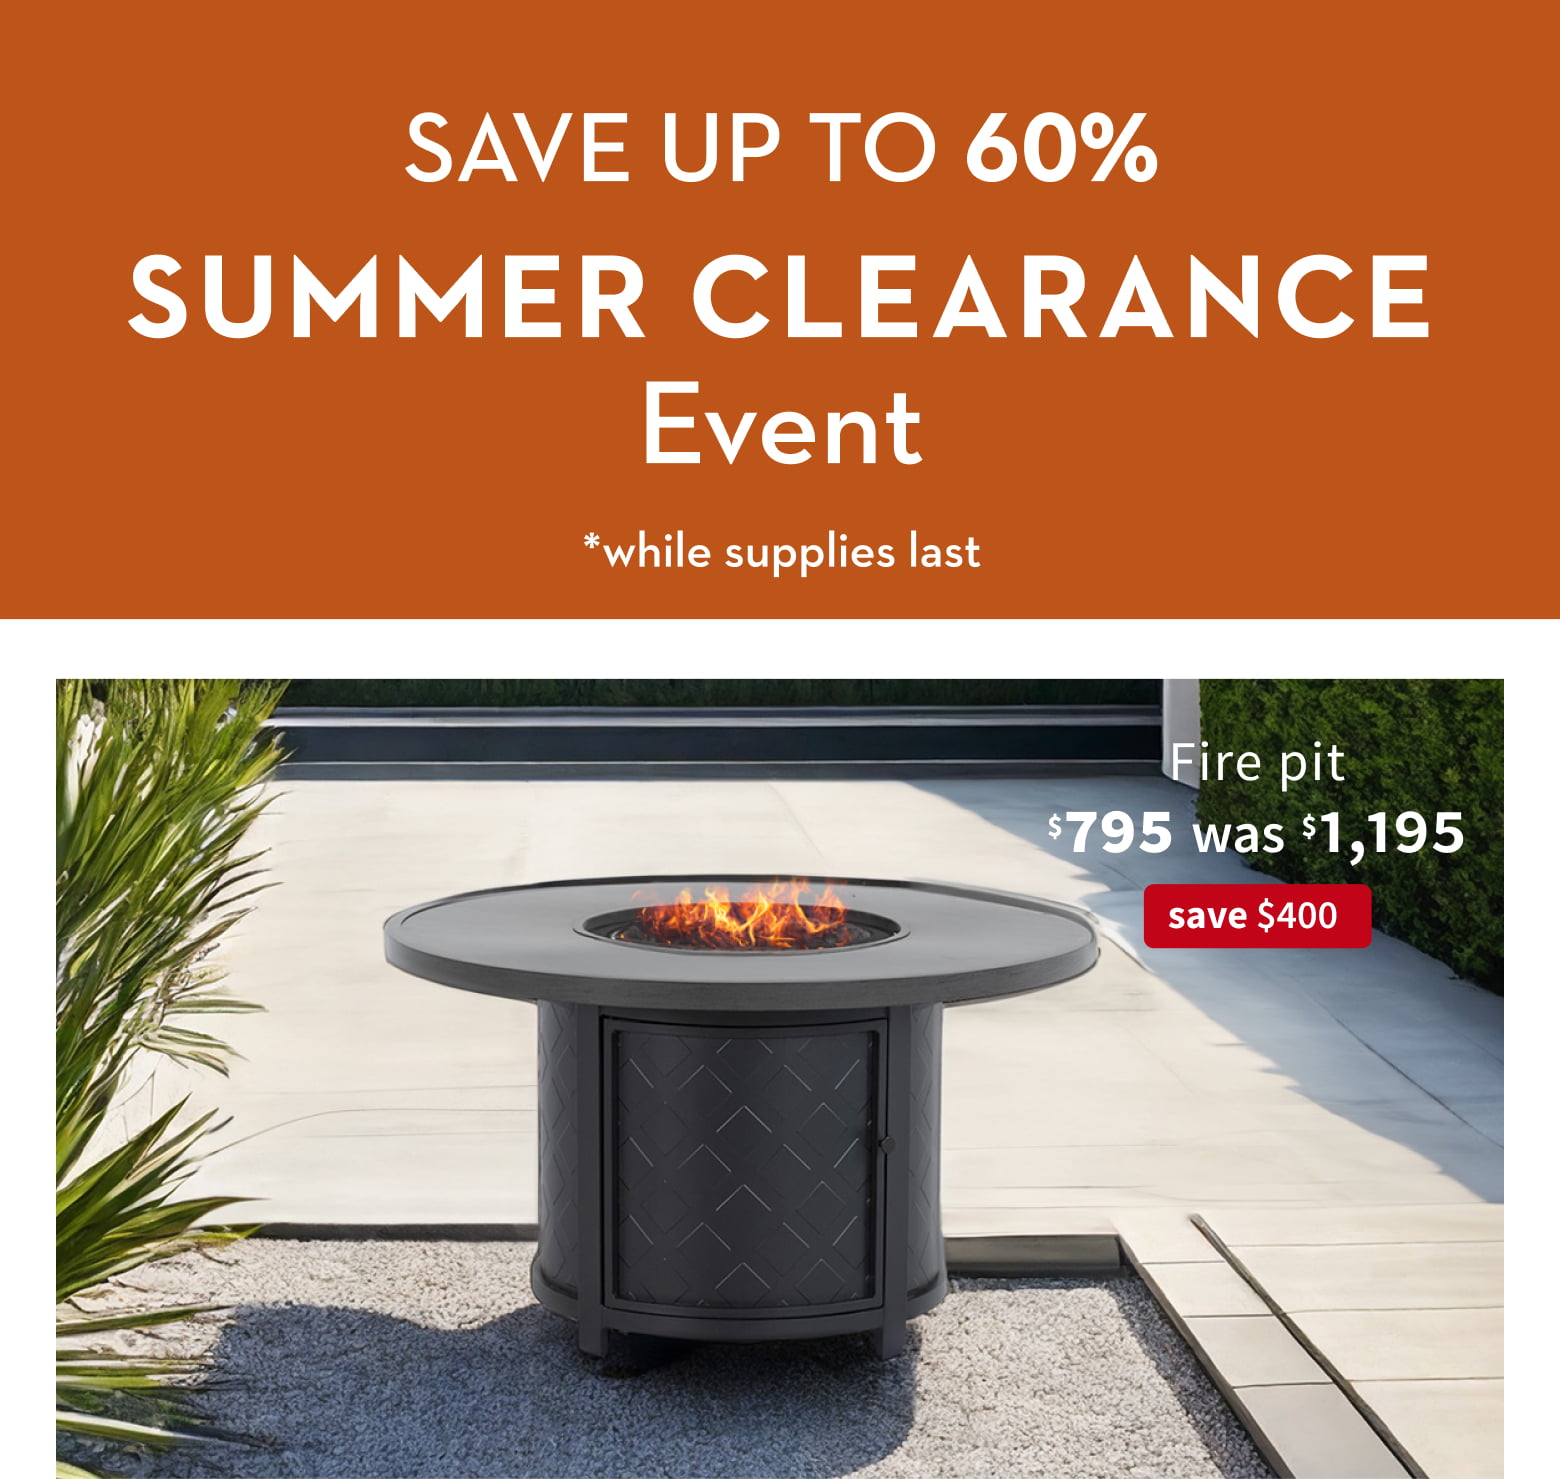 Save up to 60%. Summer Clearance Event *while supplies last. Firepit. $795 was $1,195. Save $400.